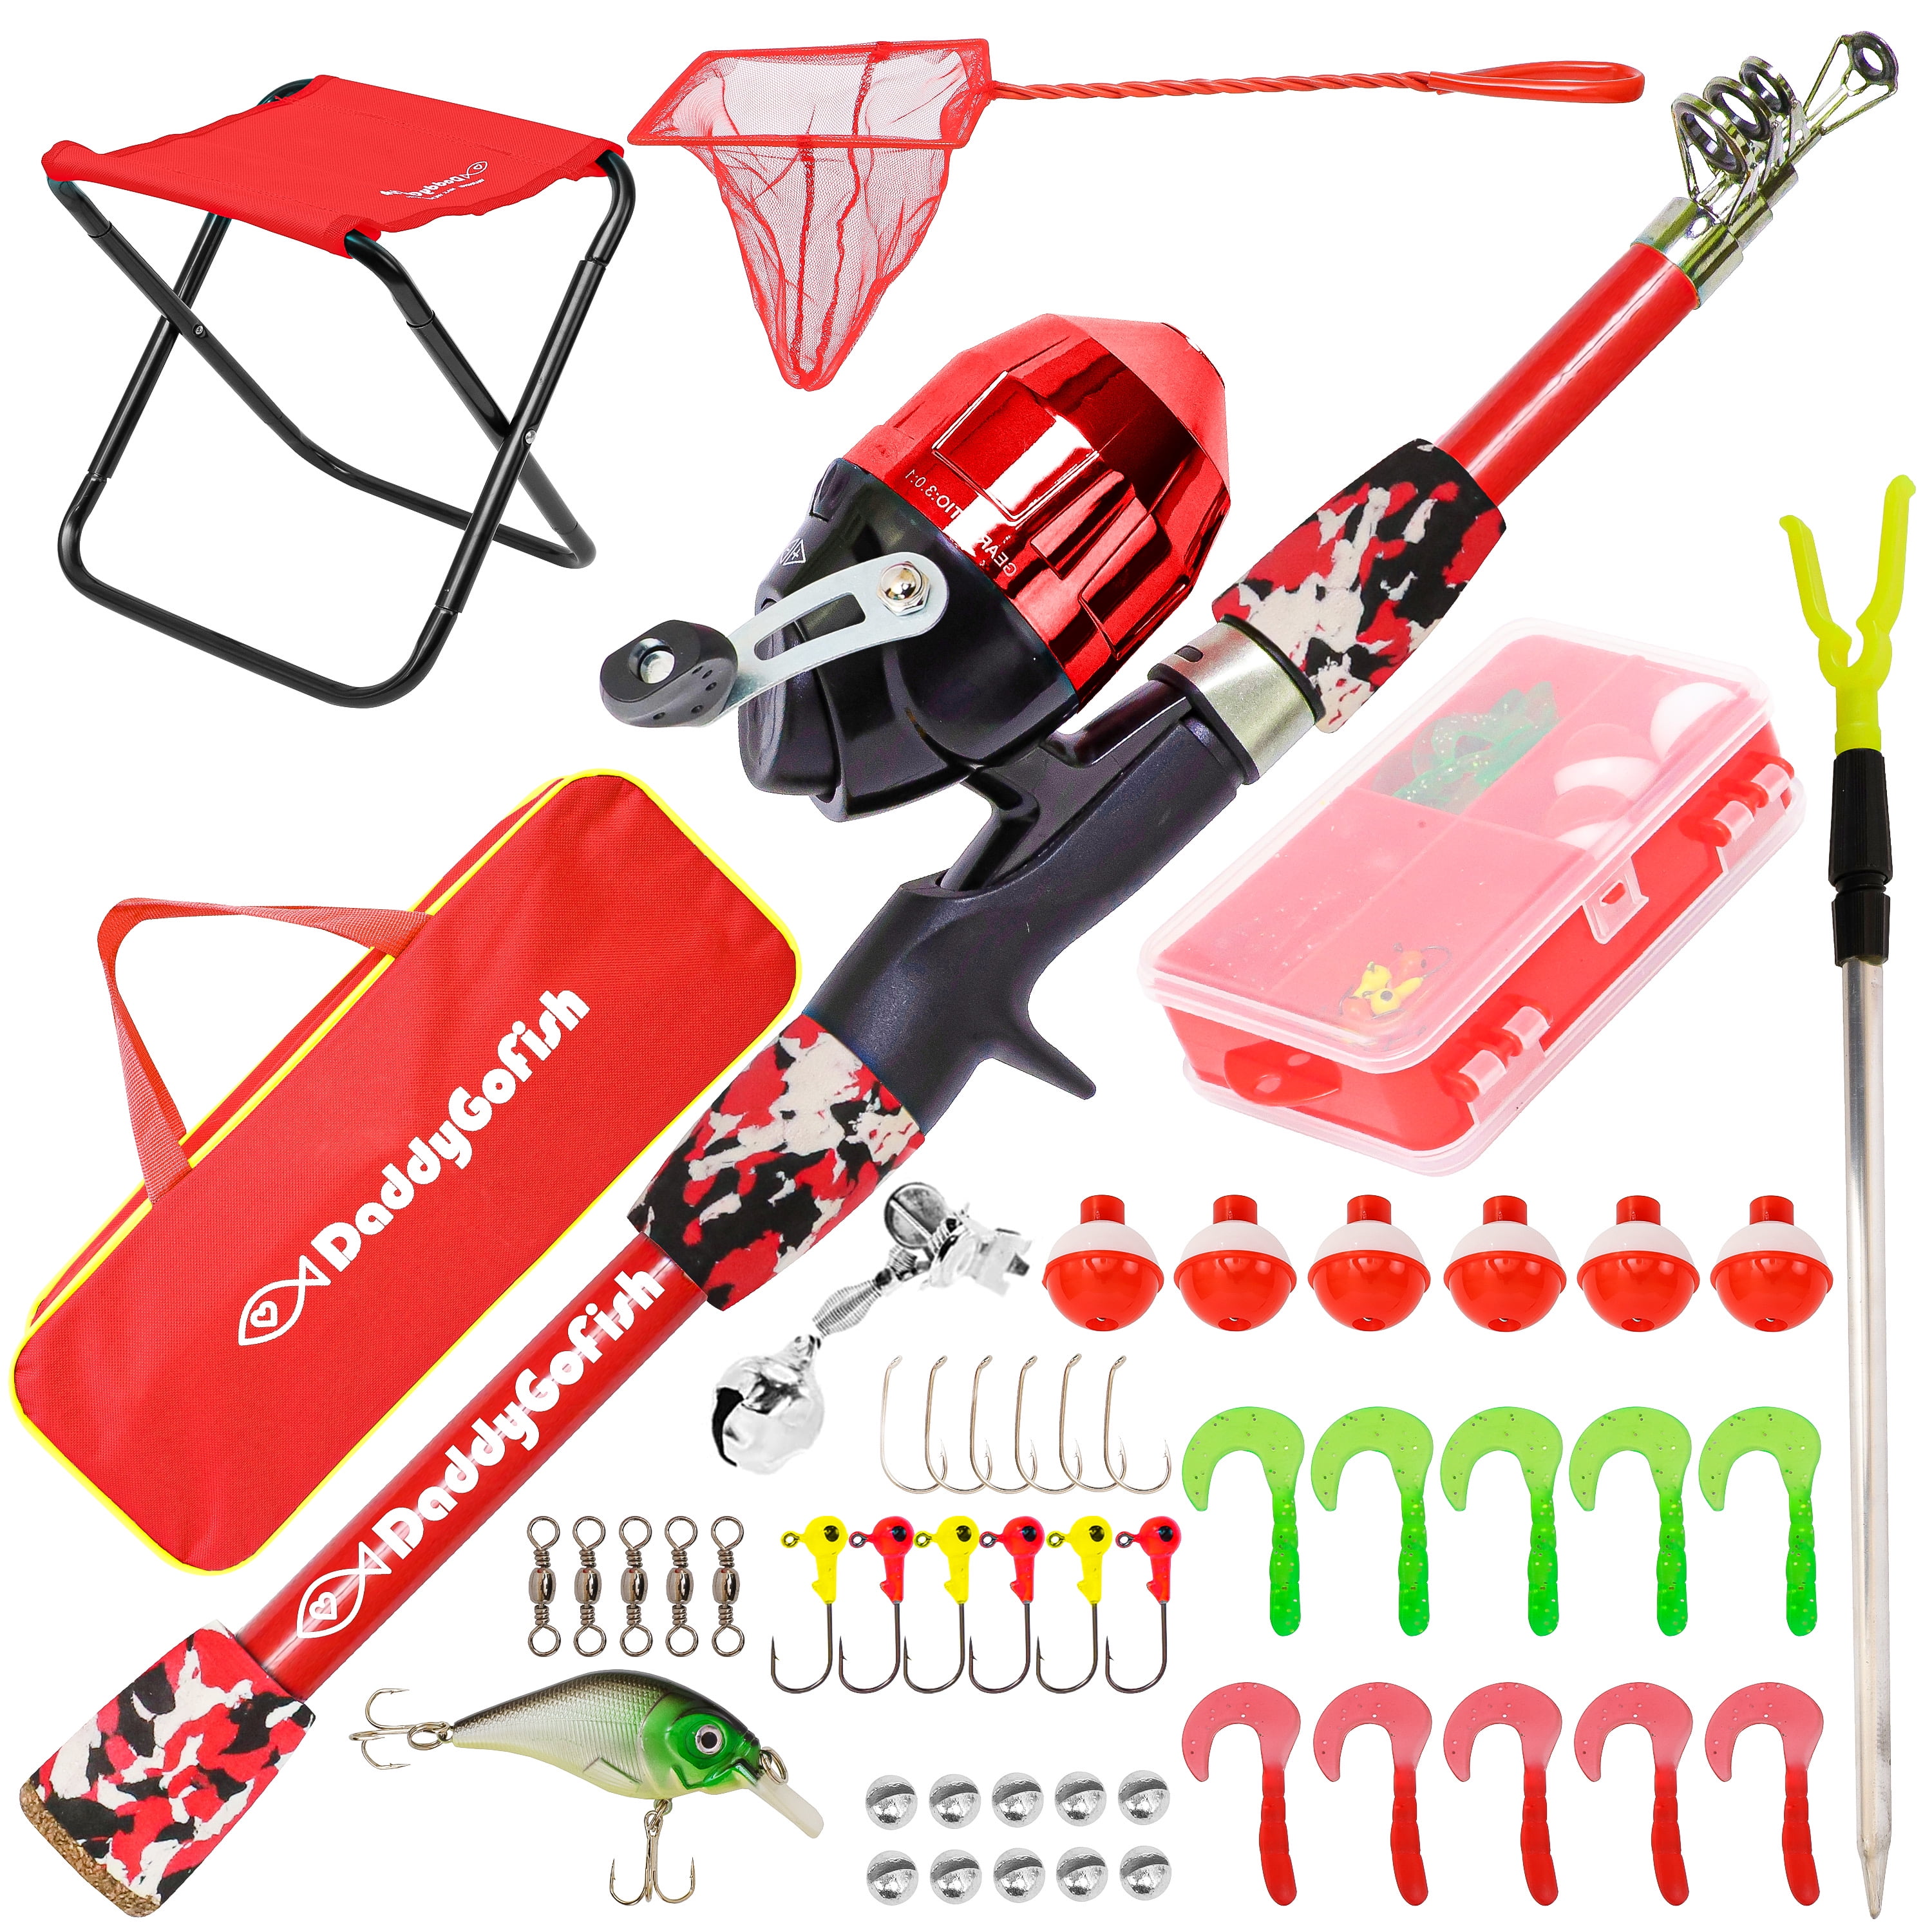 Kids Fishing Pole and Tackle Box - with Net, Travel Bag, Reel and Beginner's